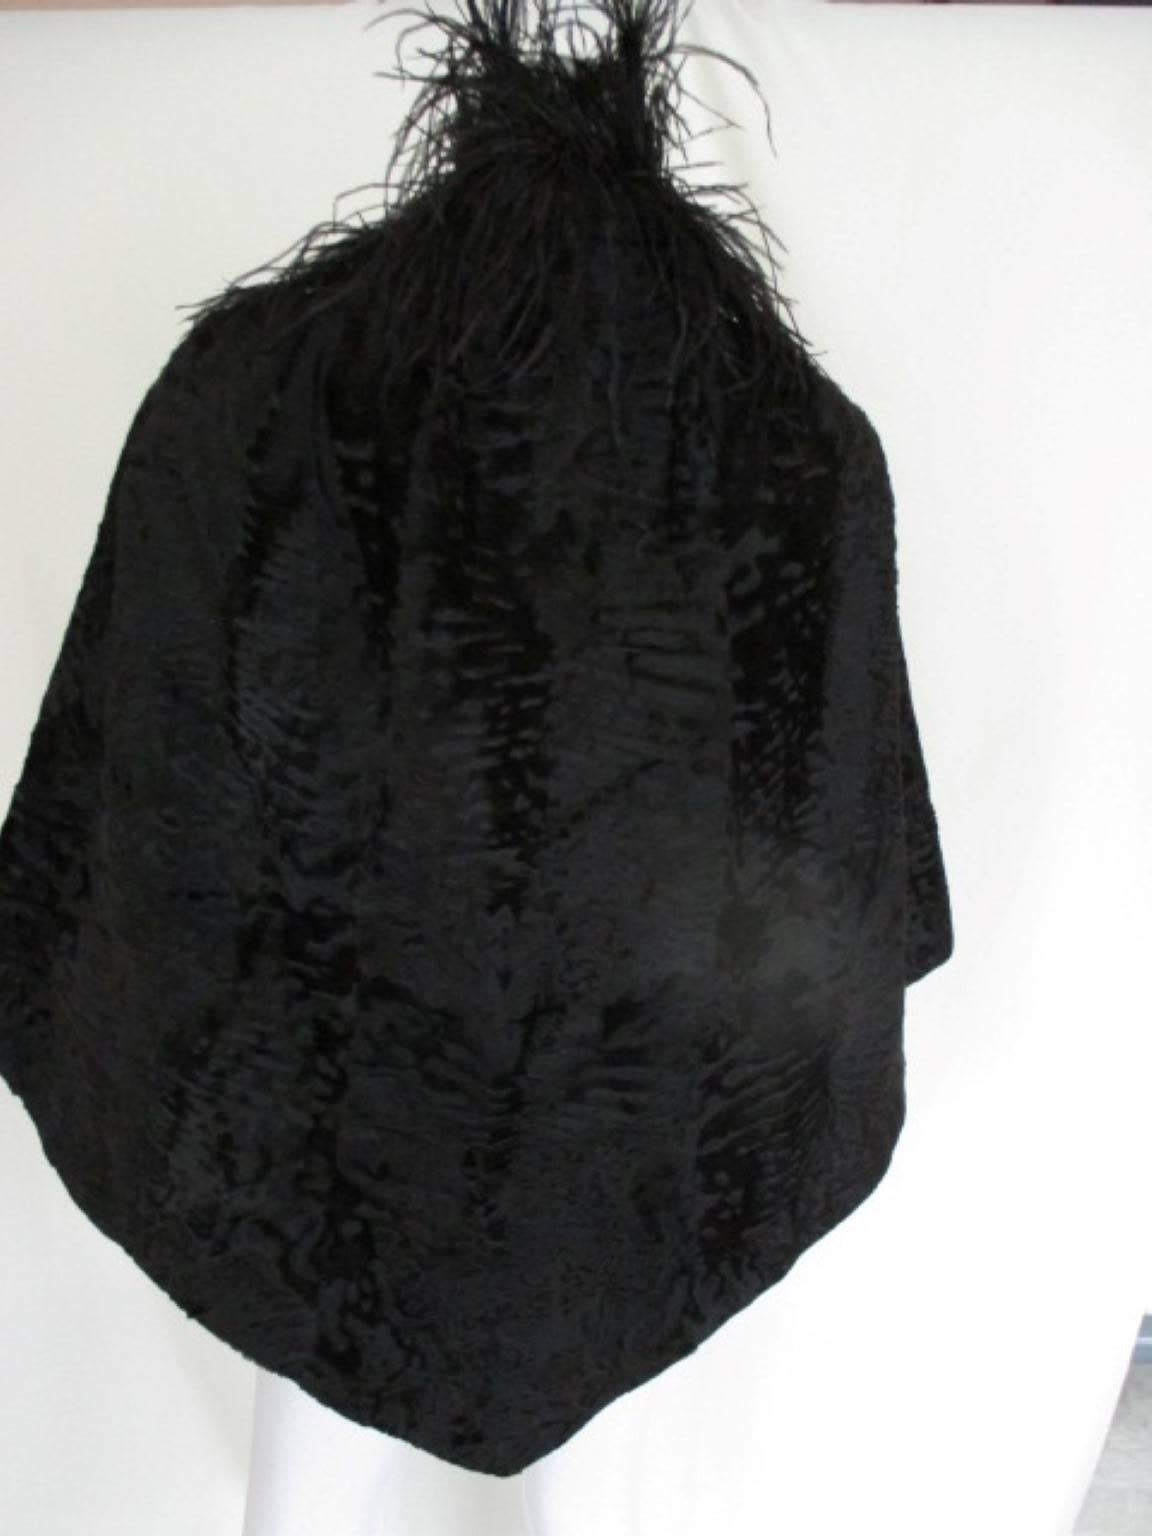 Black Broadtail Lamb Fur Stole with Ostrich Feathers In Good Condition For Sale In Amsterdam, NL